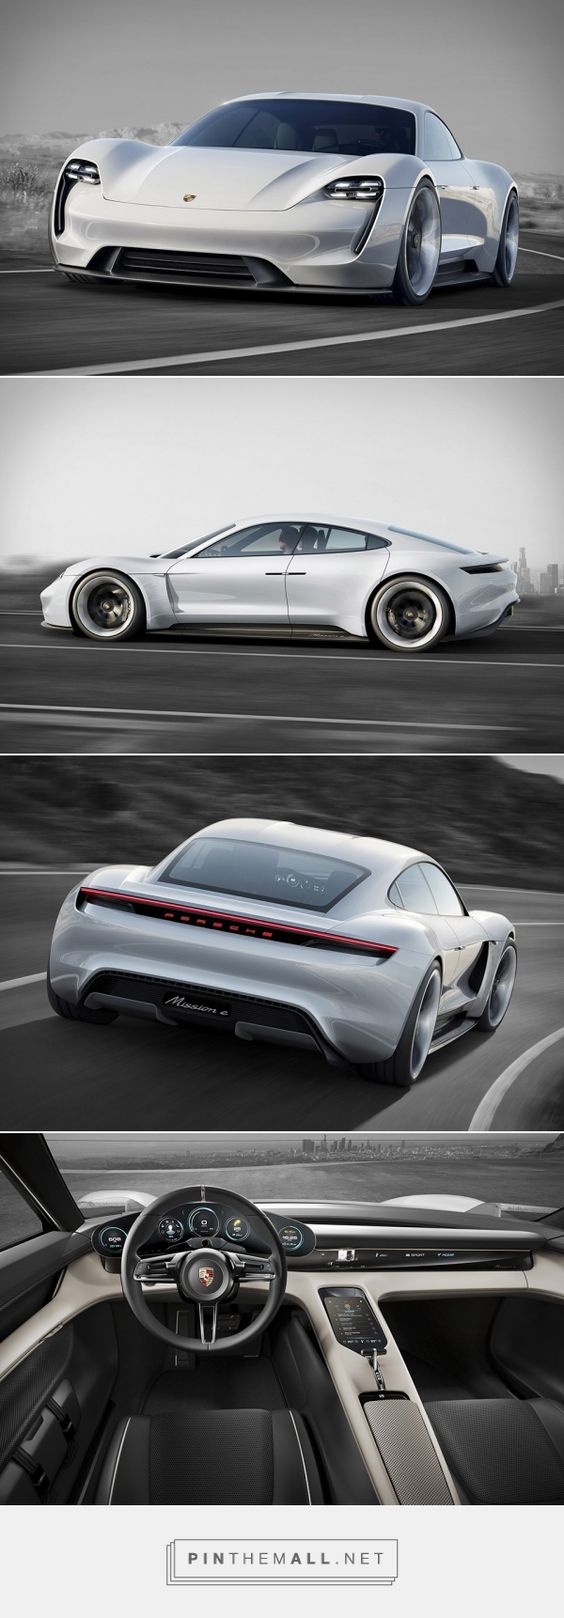 ‘’ Porsche Mission E Concept ‘’ Cars Design And Concepts, Best Of New Cars, Awesome Cars